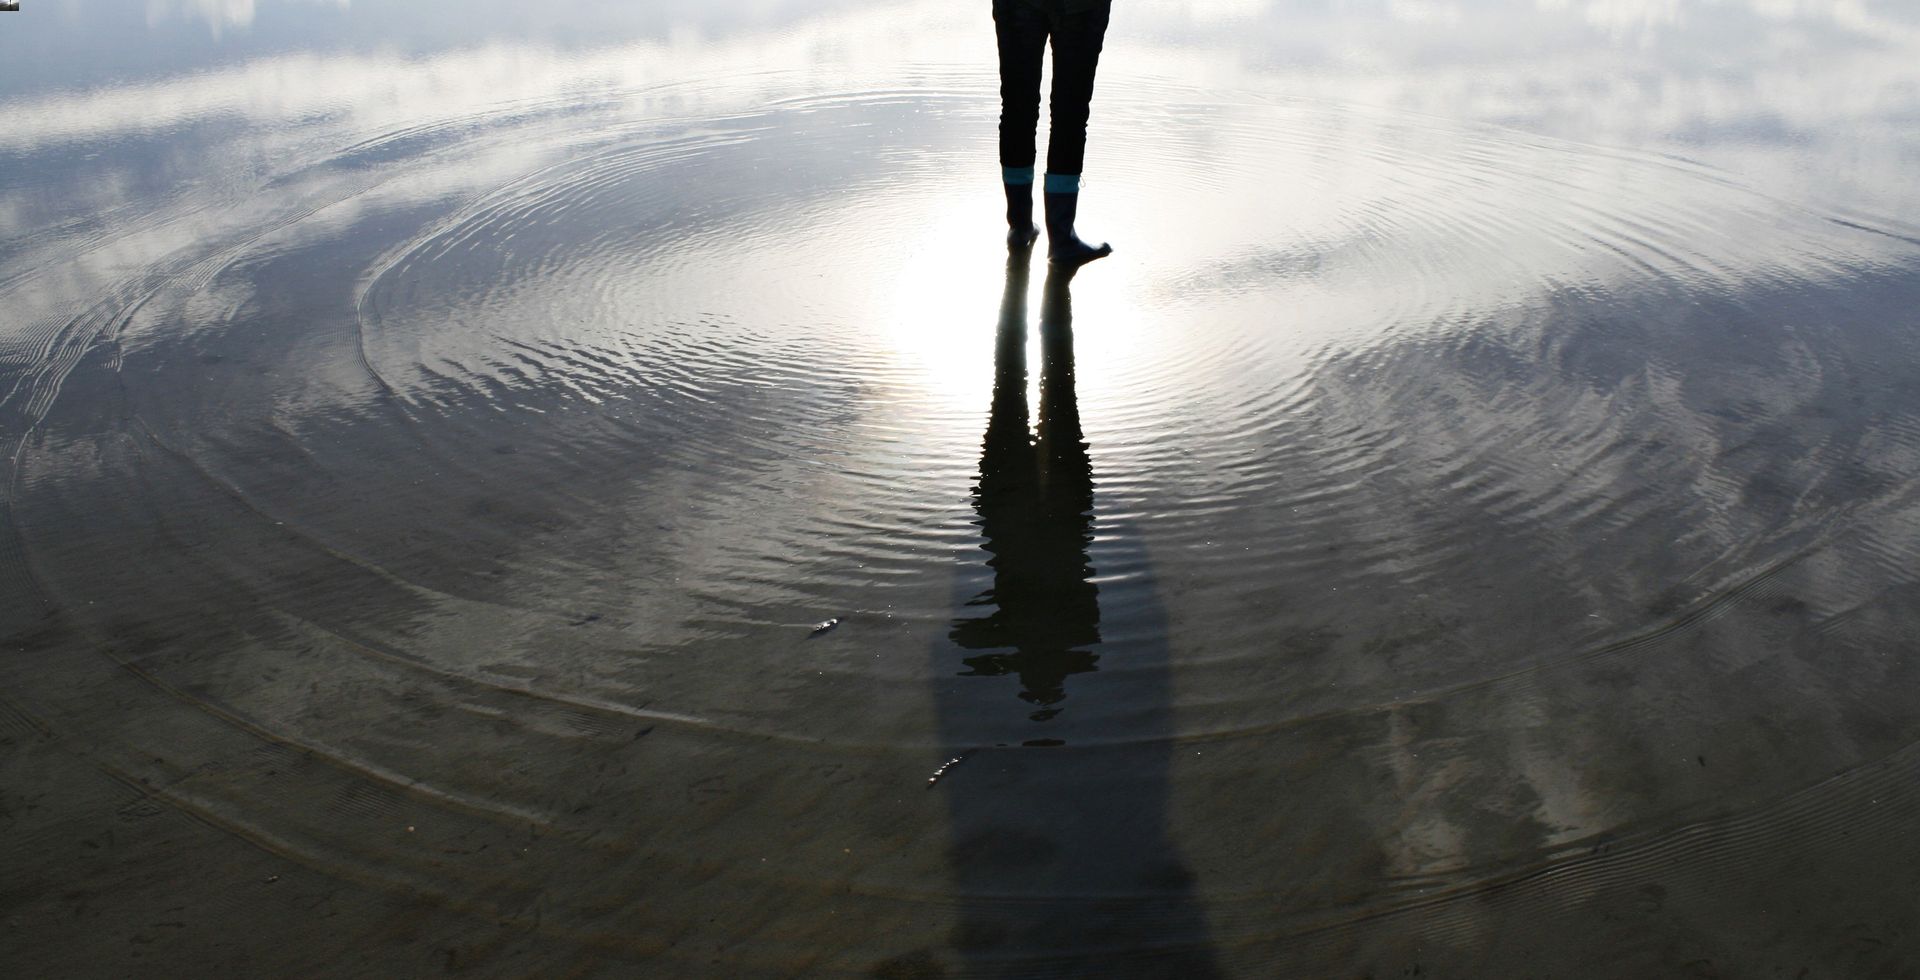 View of a person's feet standing in a shallow pool of water